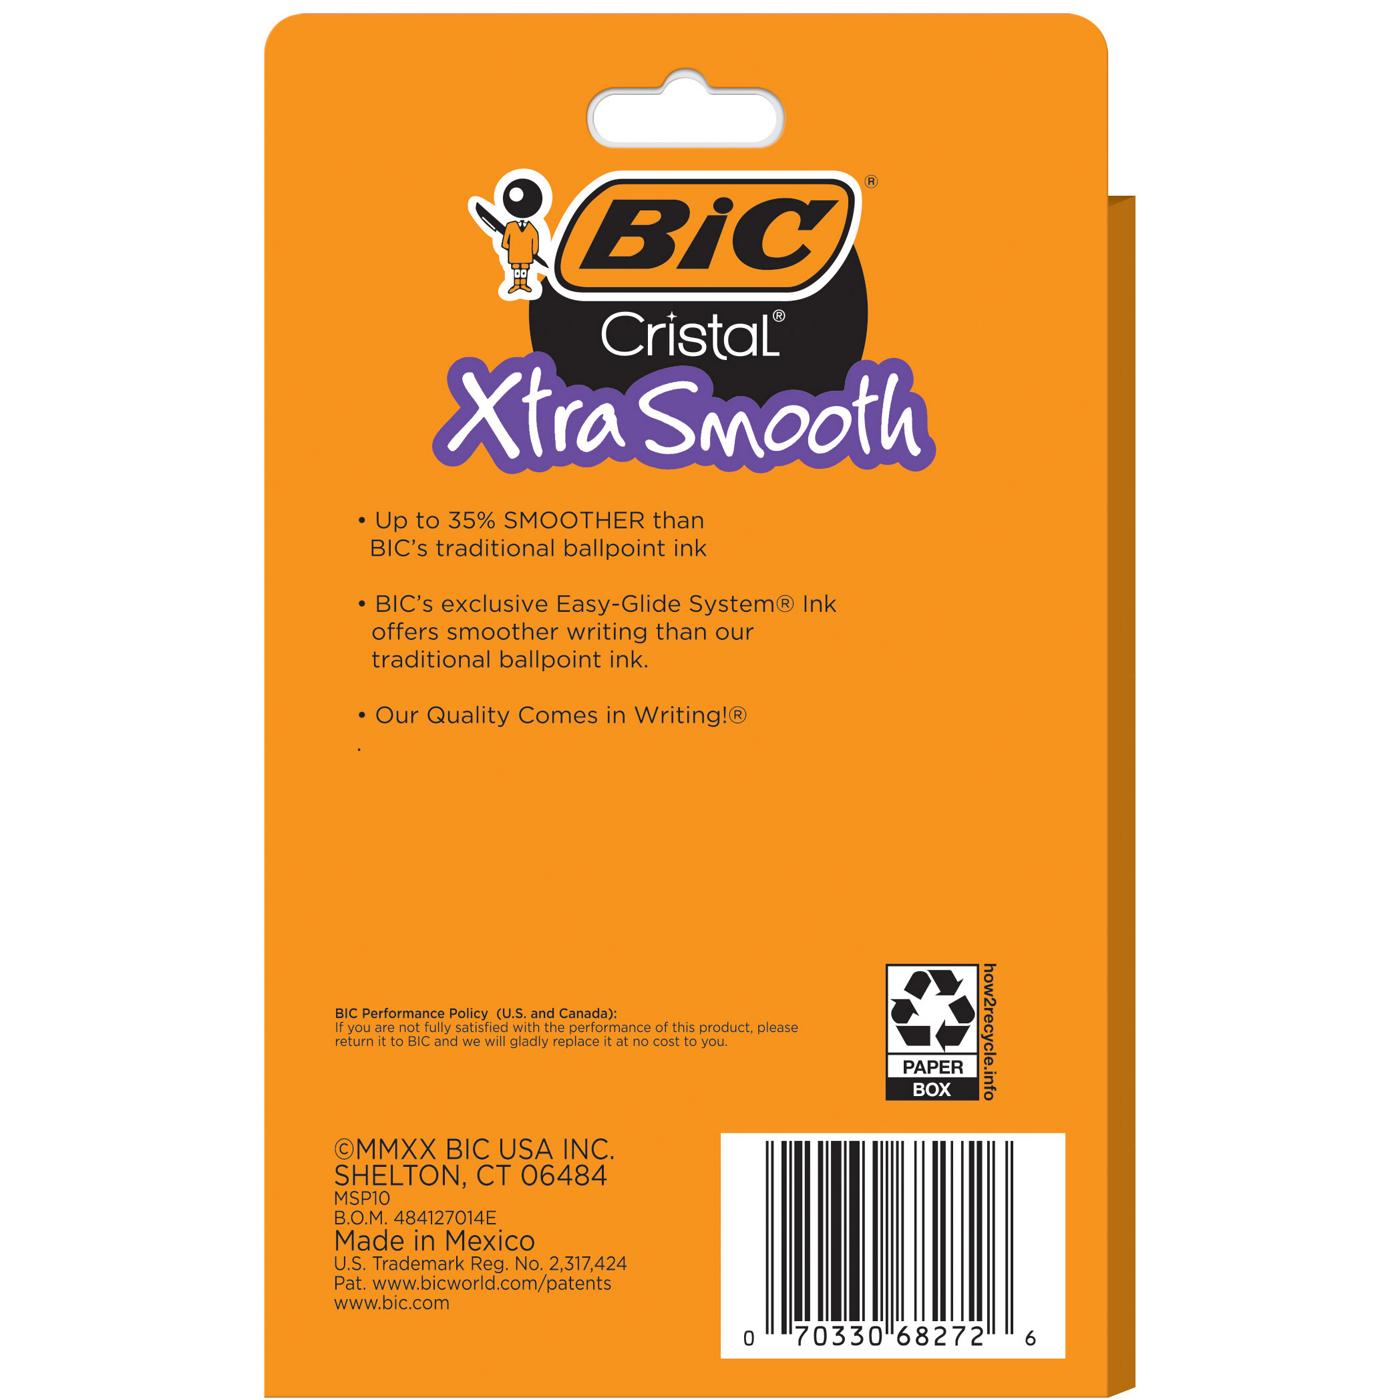 BIC Cristal Xtra Smooth 1.0mm Ball Pens - Blue Ink; image 2 of 2